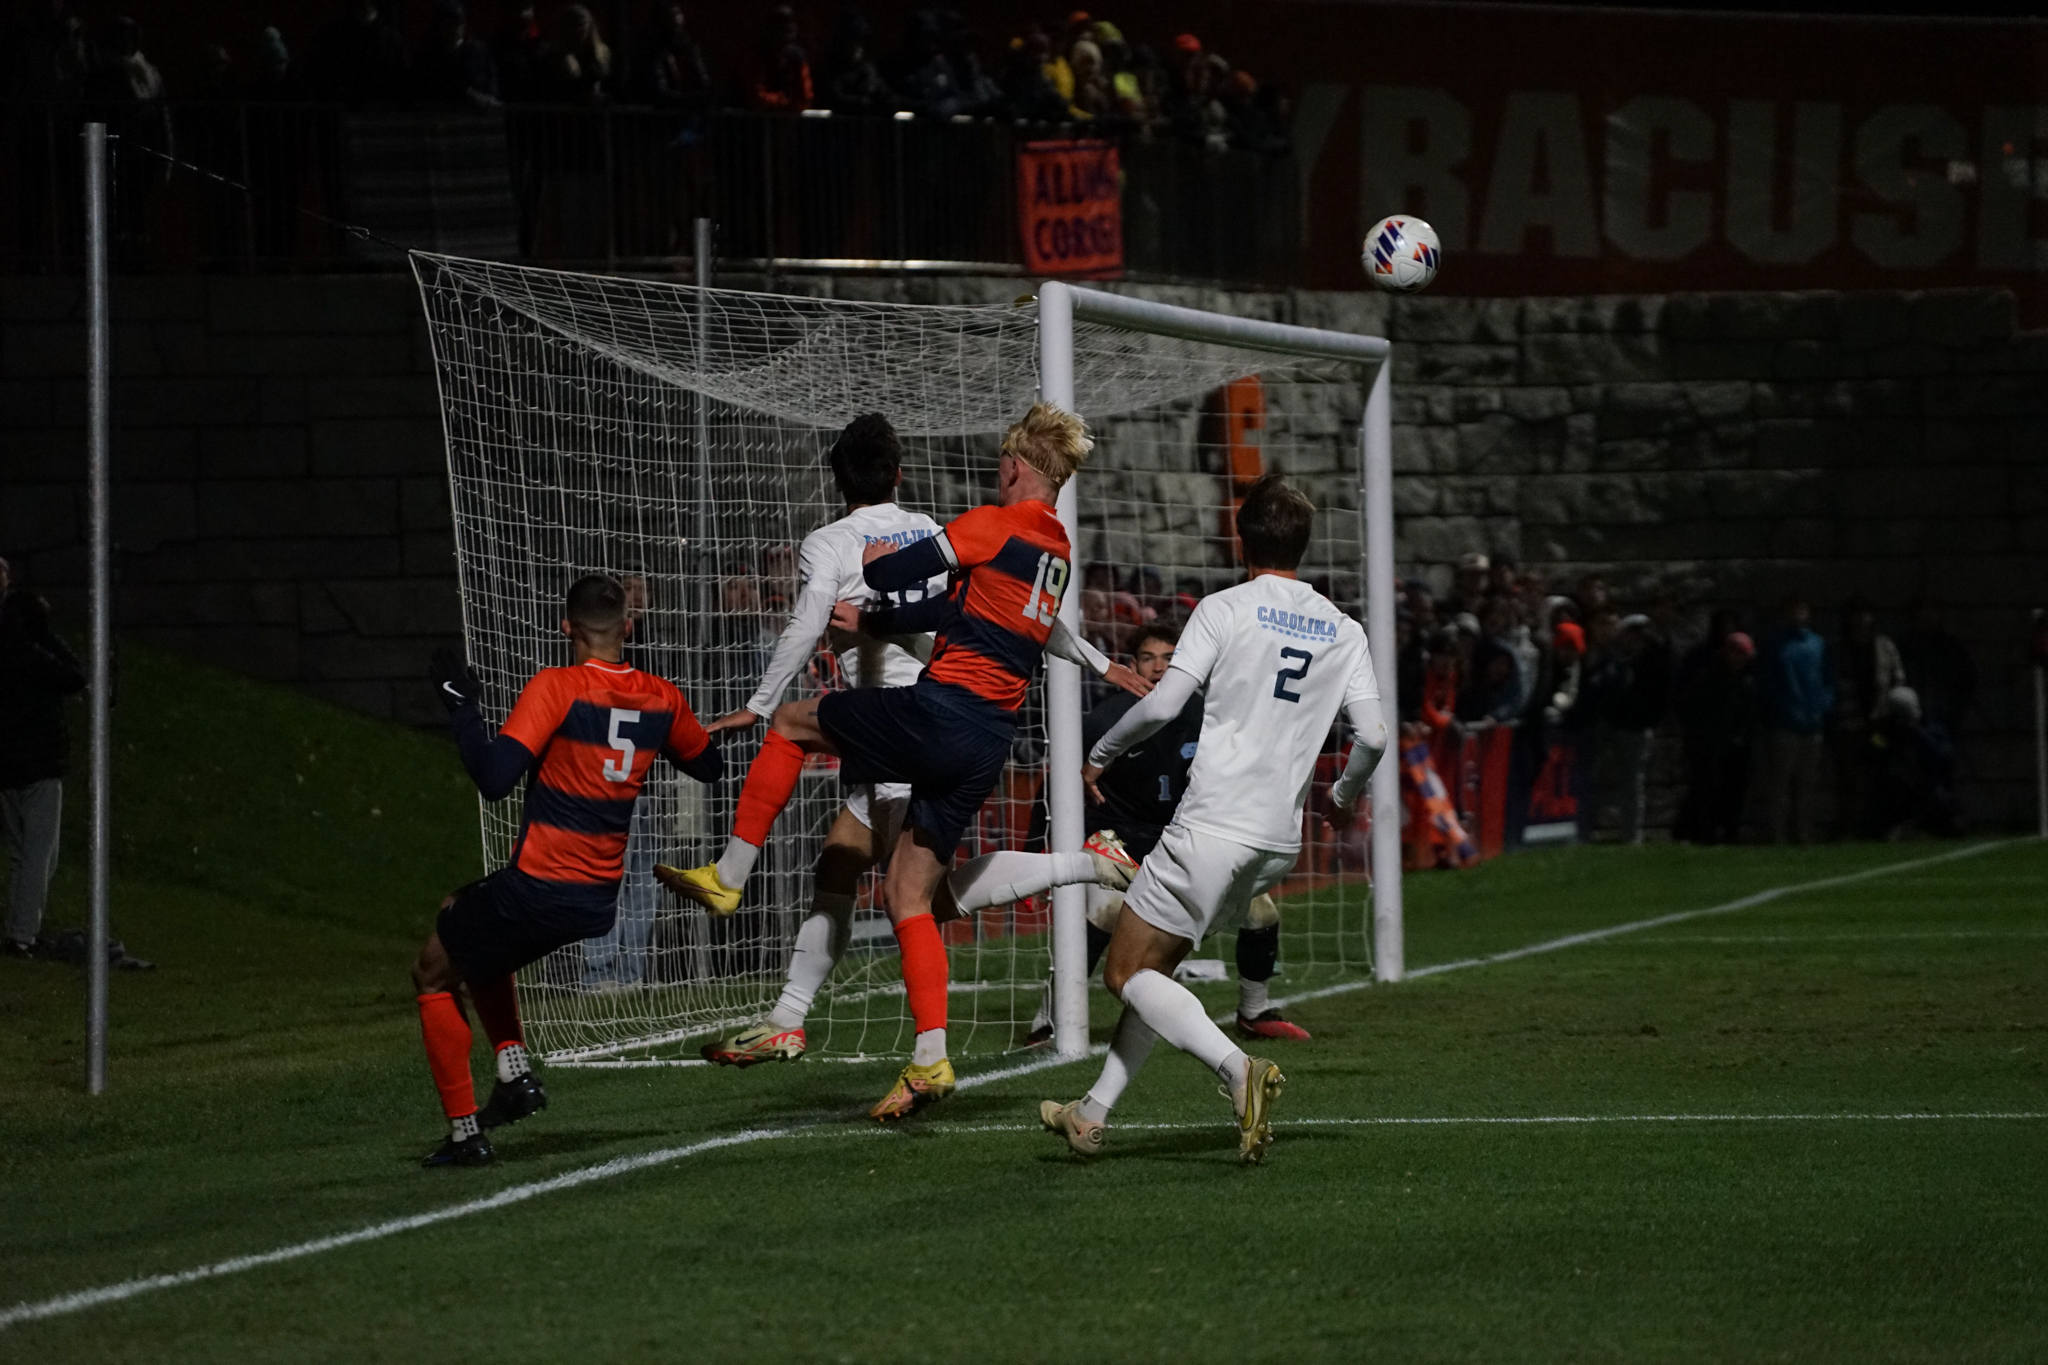 UNC narrowly avoids conceding a goal as it defends a corner.